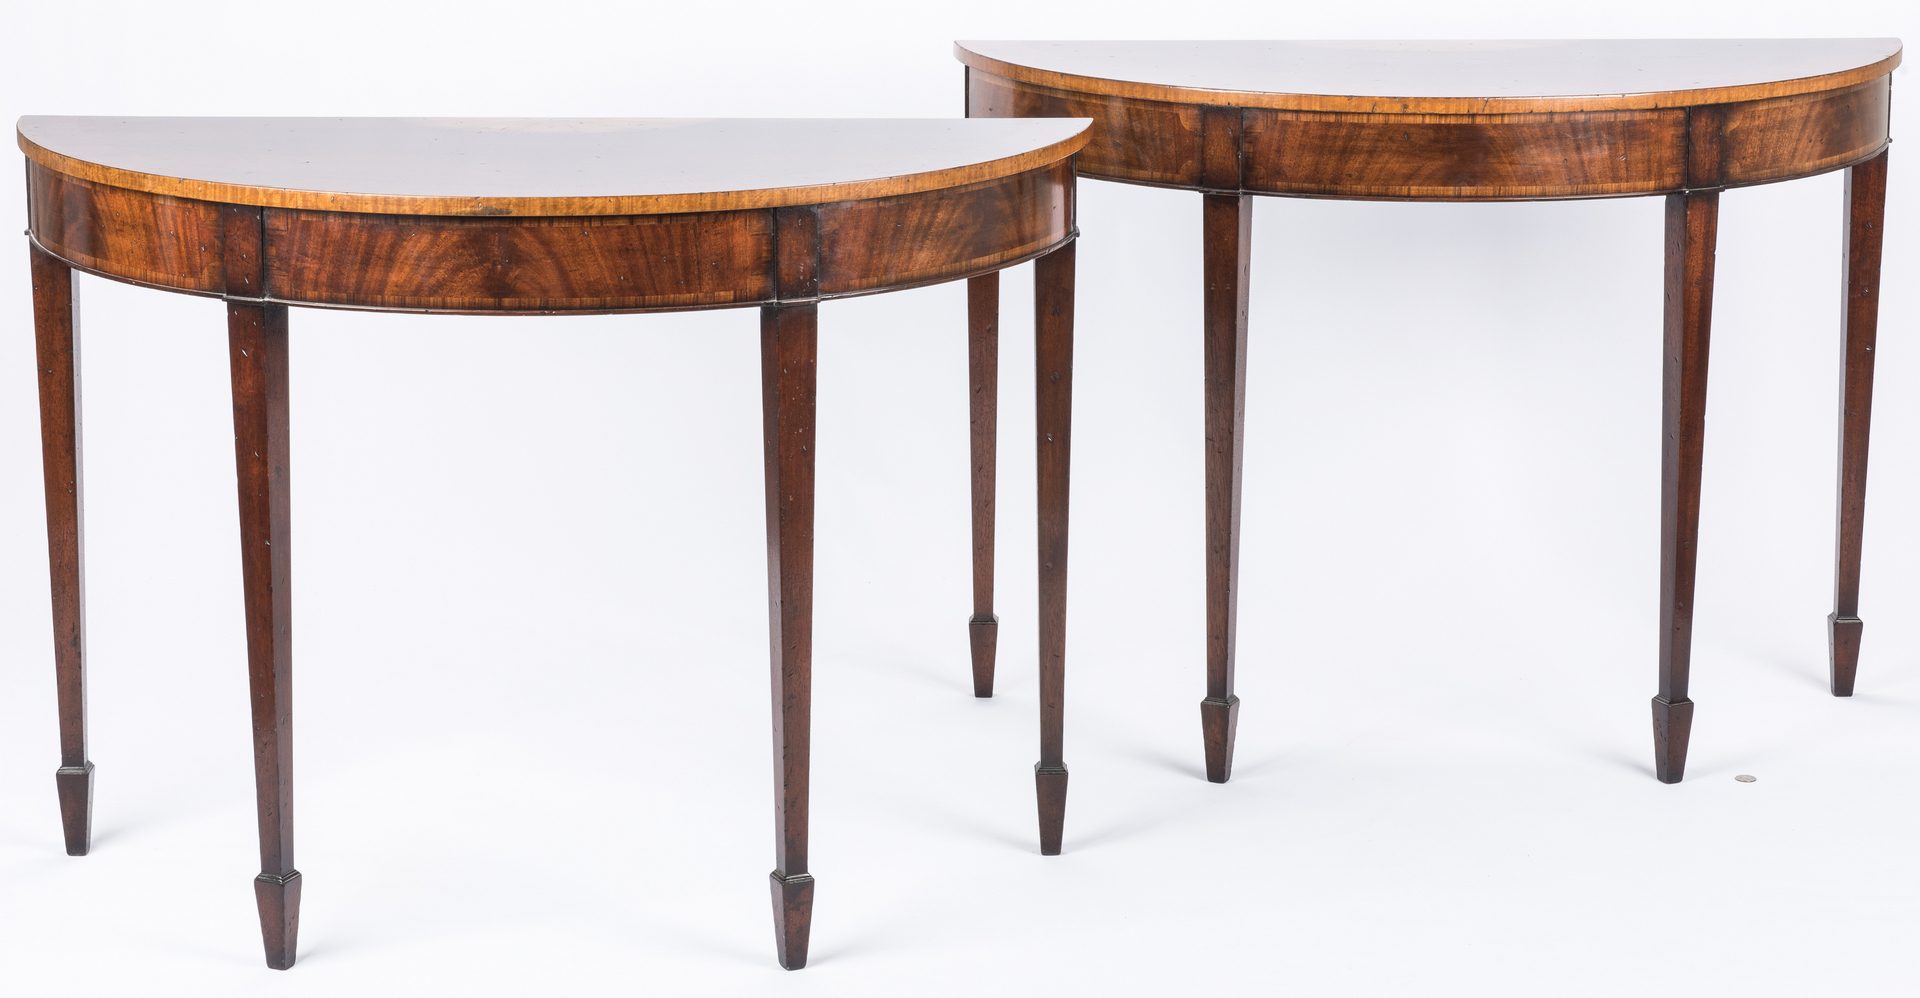 Lot 437: Pair of Georgian style Demilune Tables